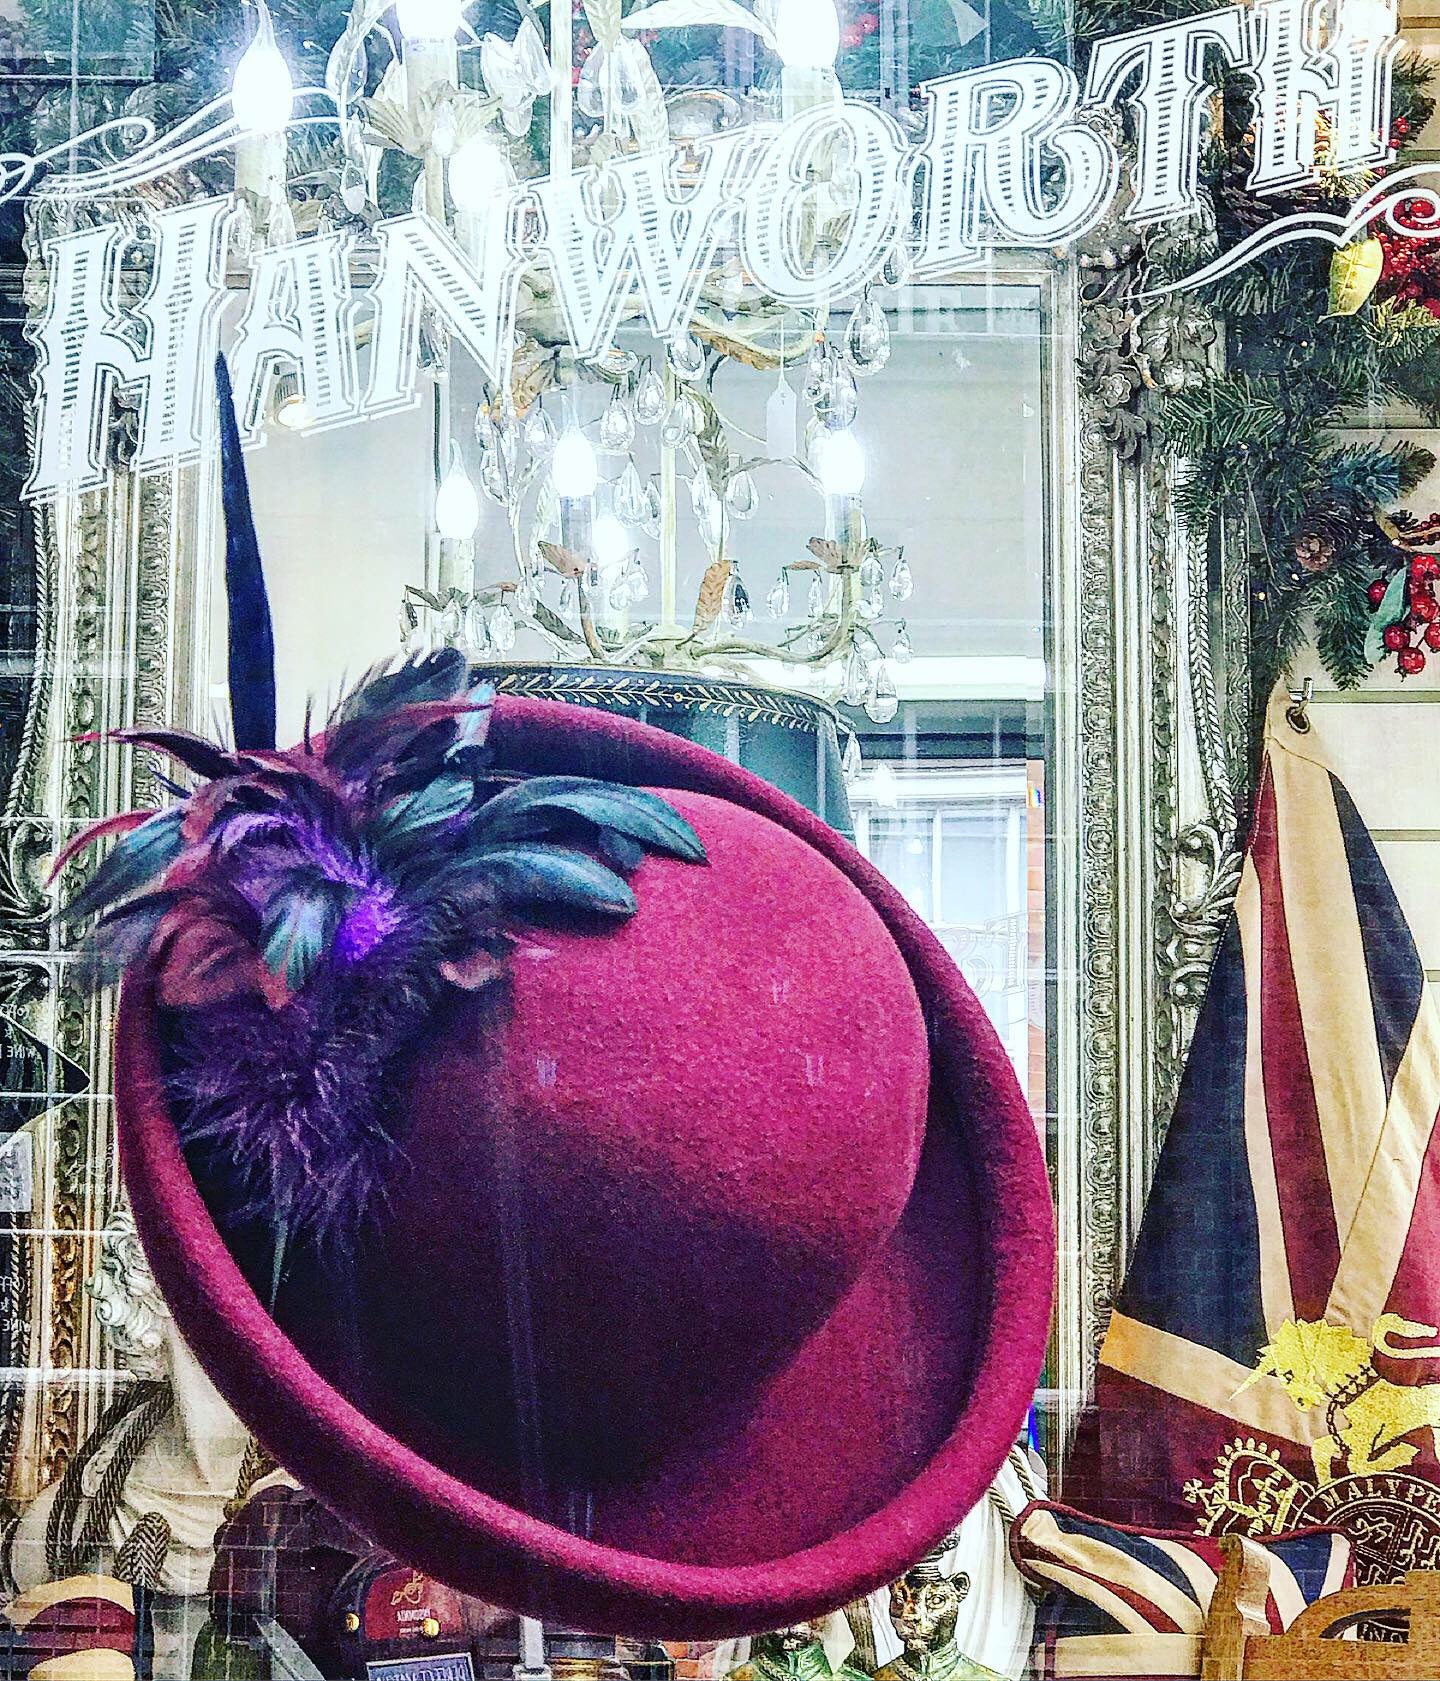 Maroon rolled brim Cloche with feather corsage